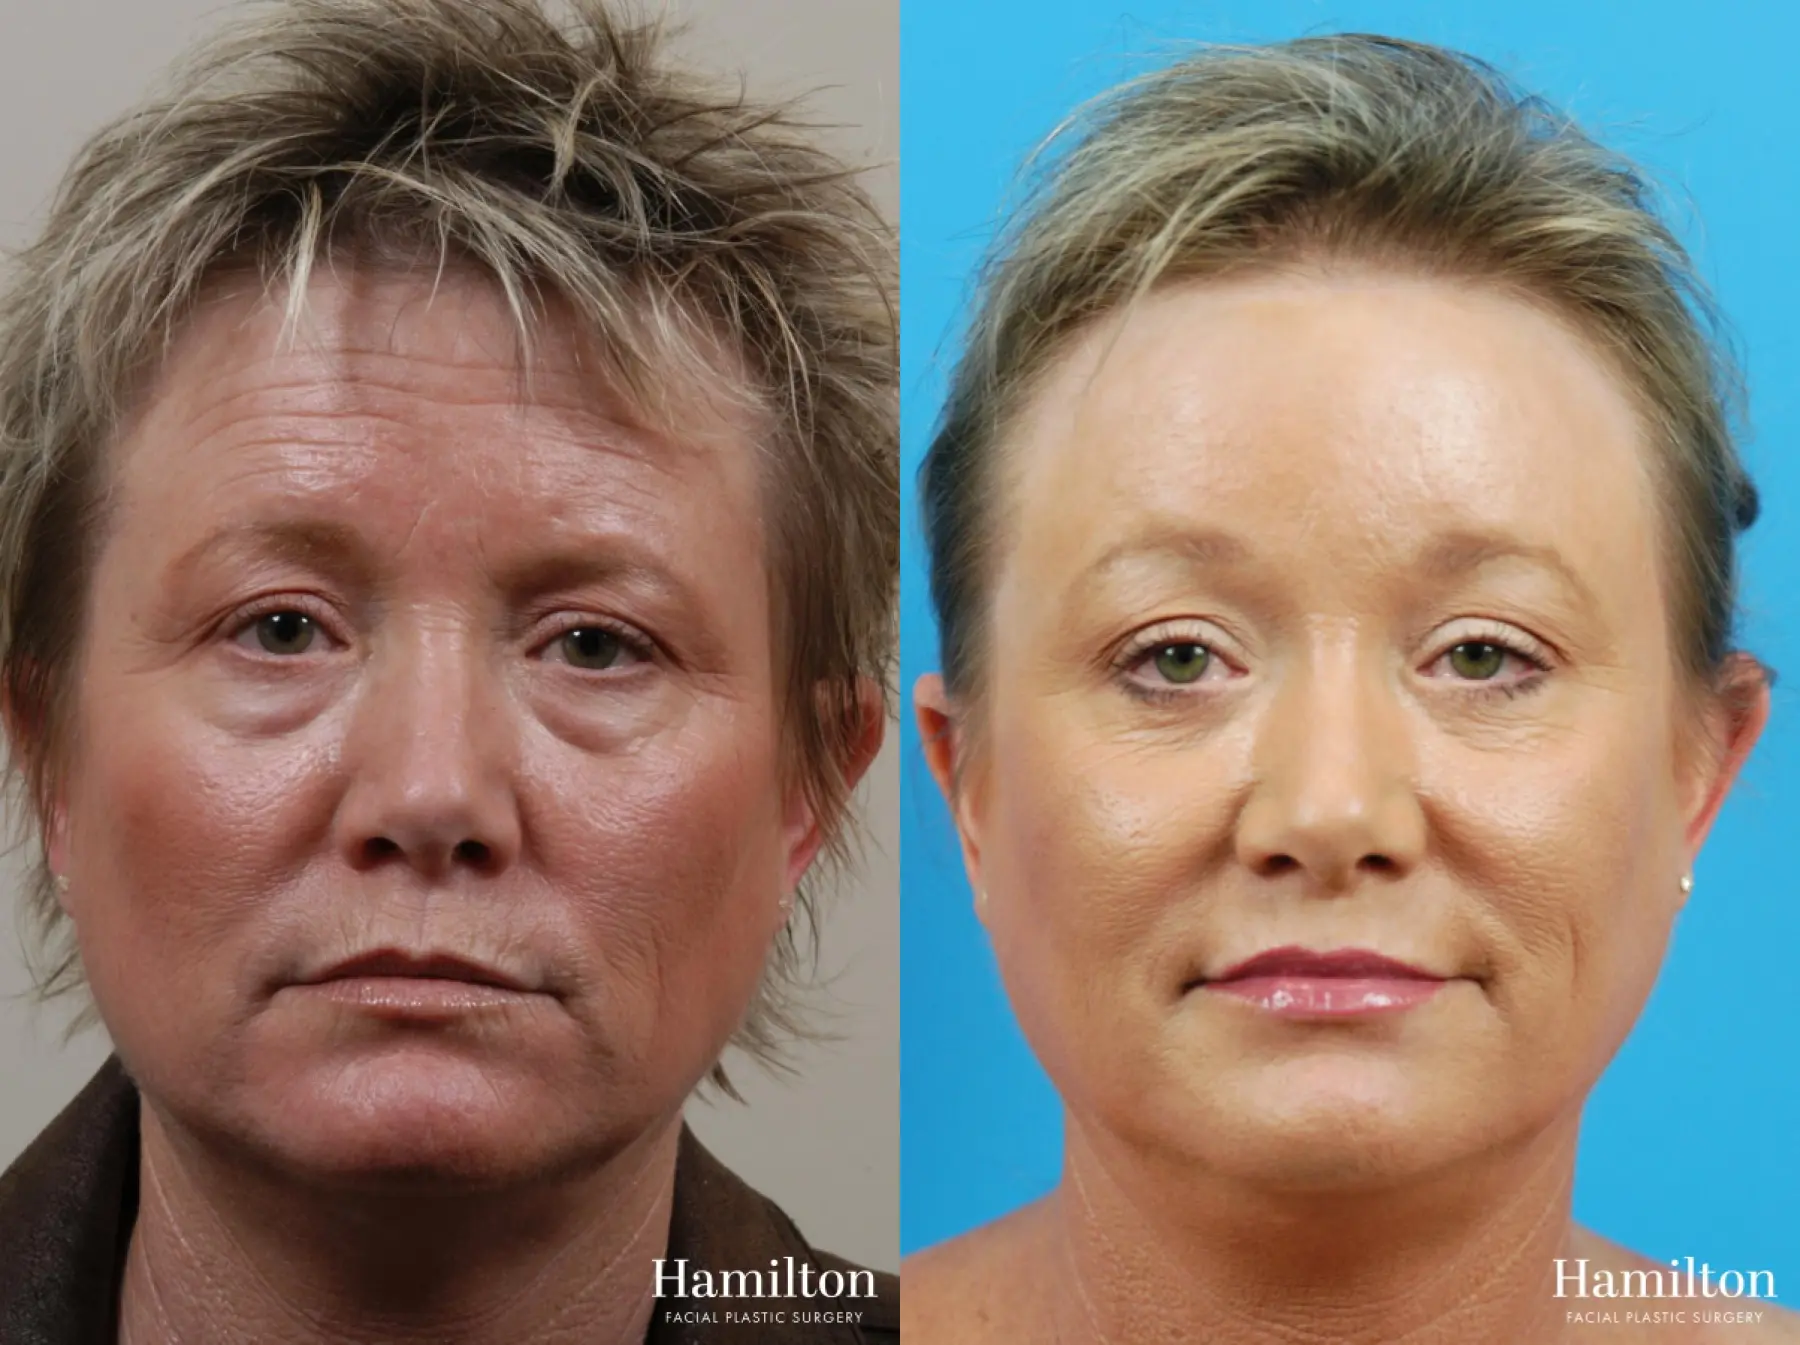 C02 Laser: Patient 2 - Before and After  